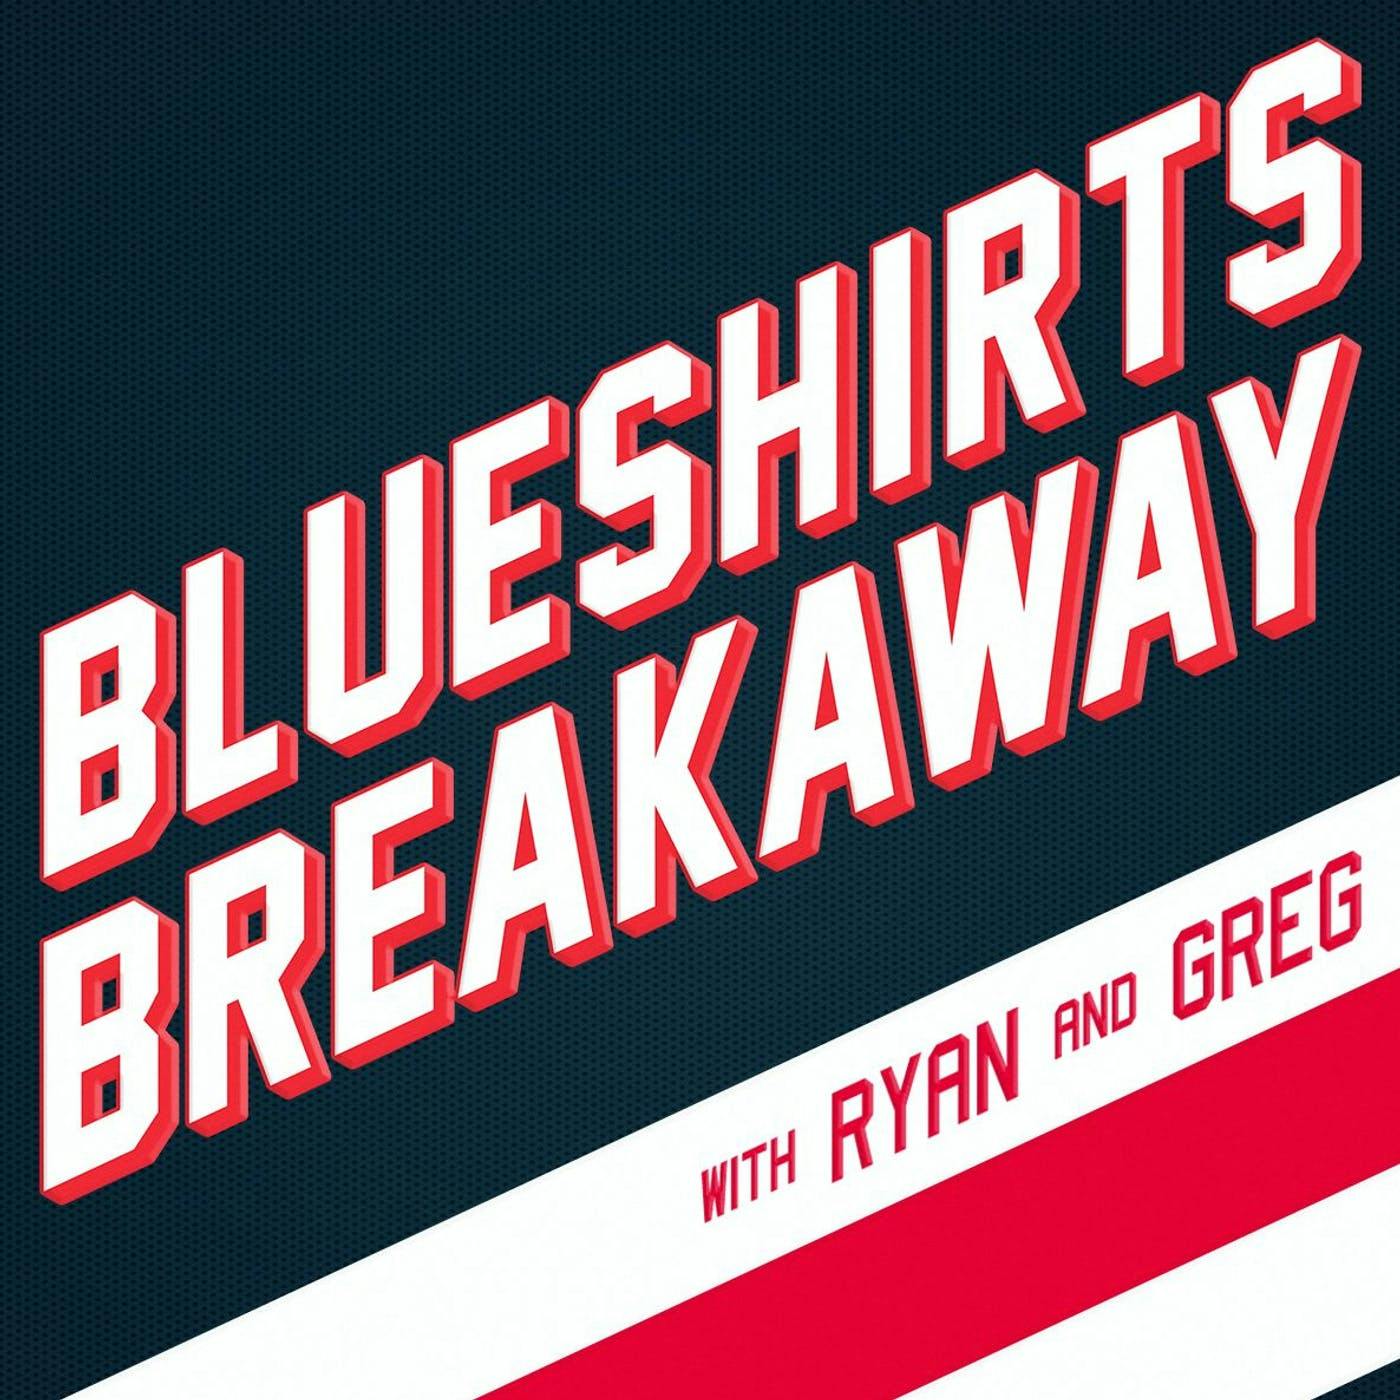 Blueshirts Breakaway EP 129 - What to make of JT in Tampa and the Free Agent Market